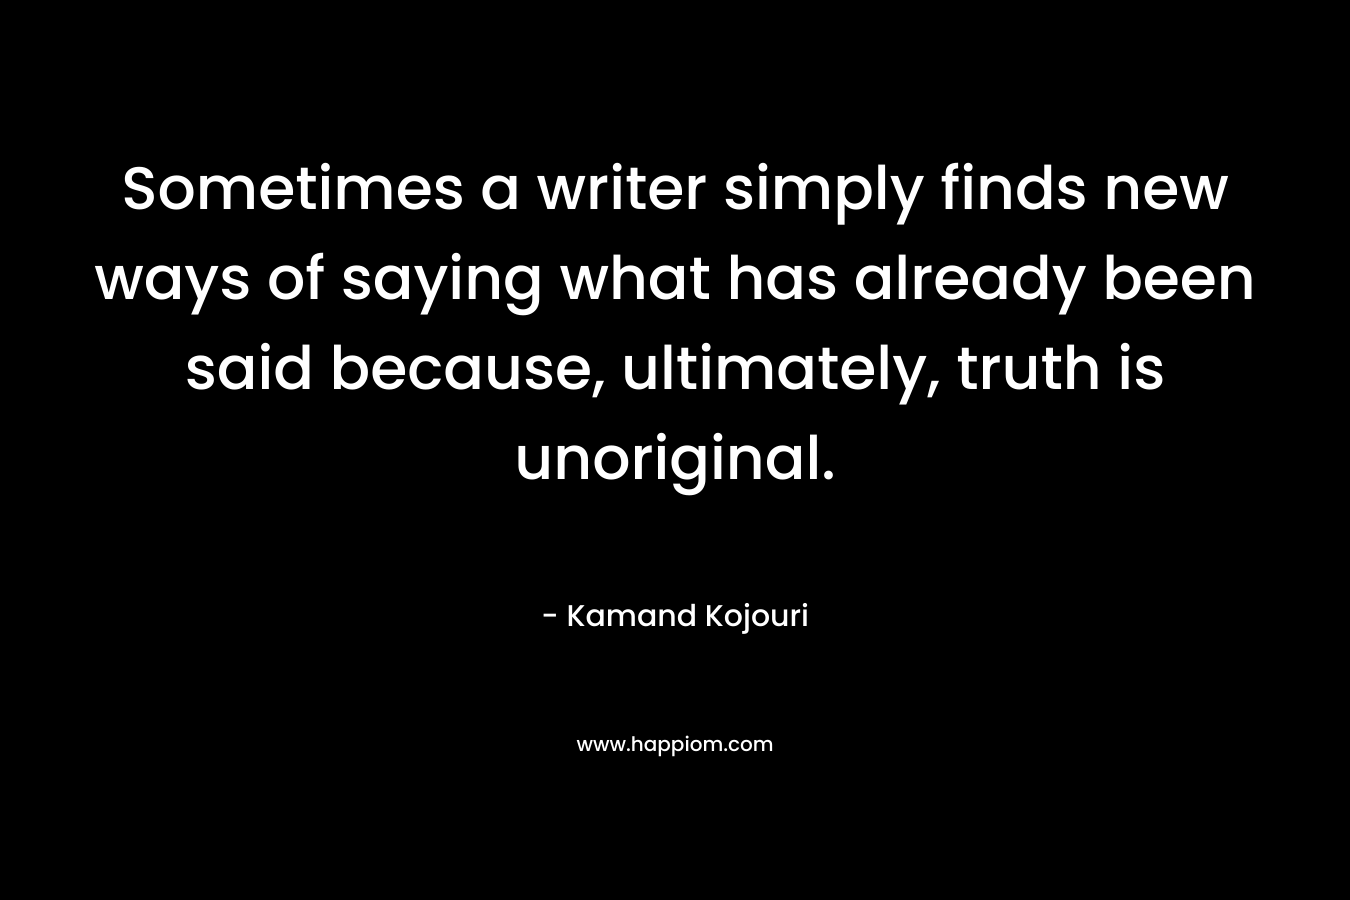 Sometimes a writer simply finds new ways of saying what has already been said because, ultimately, truth is unoriginal.